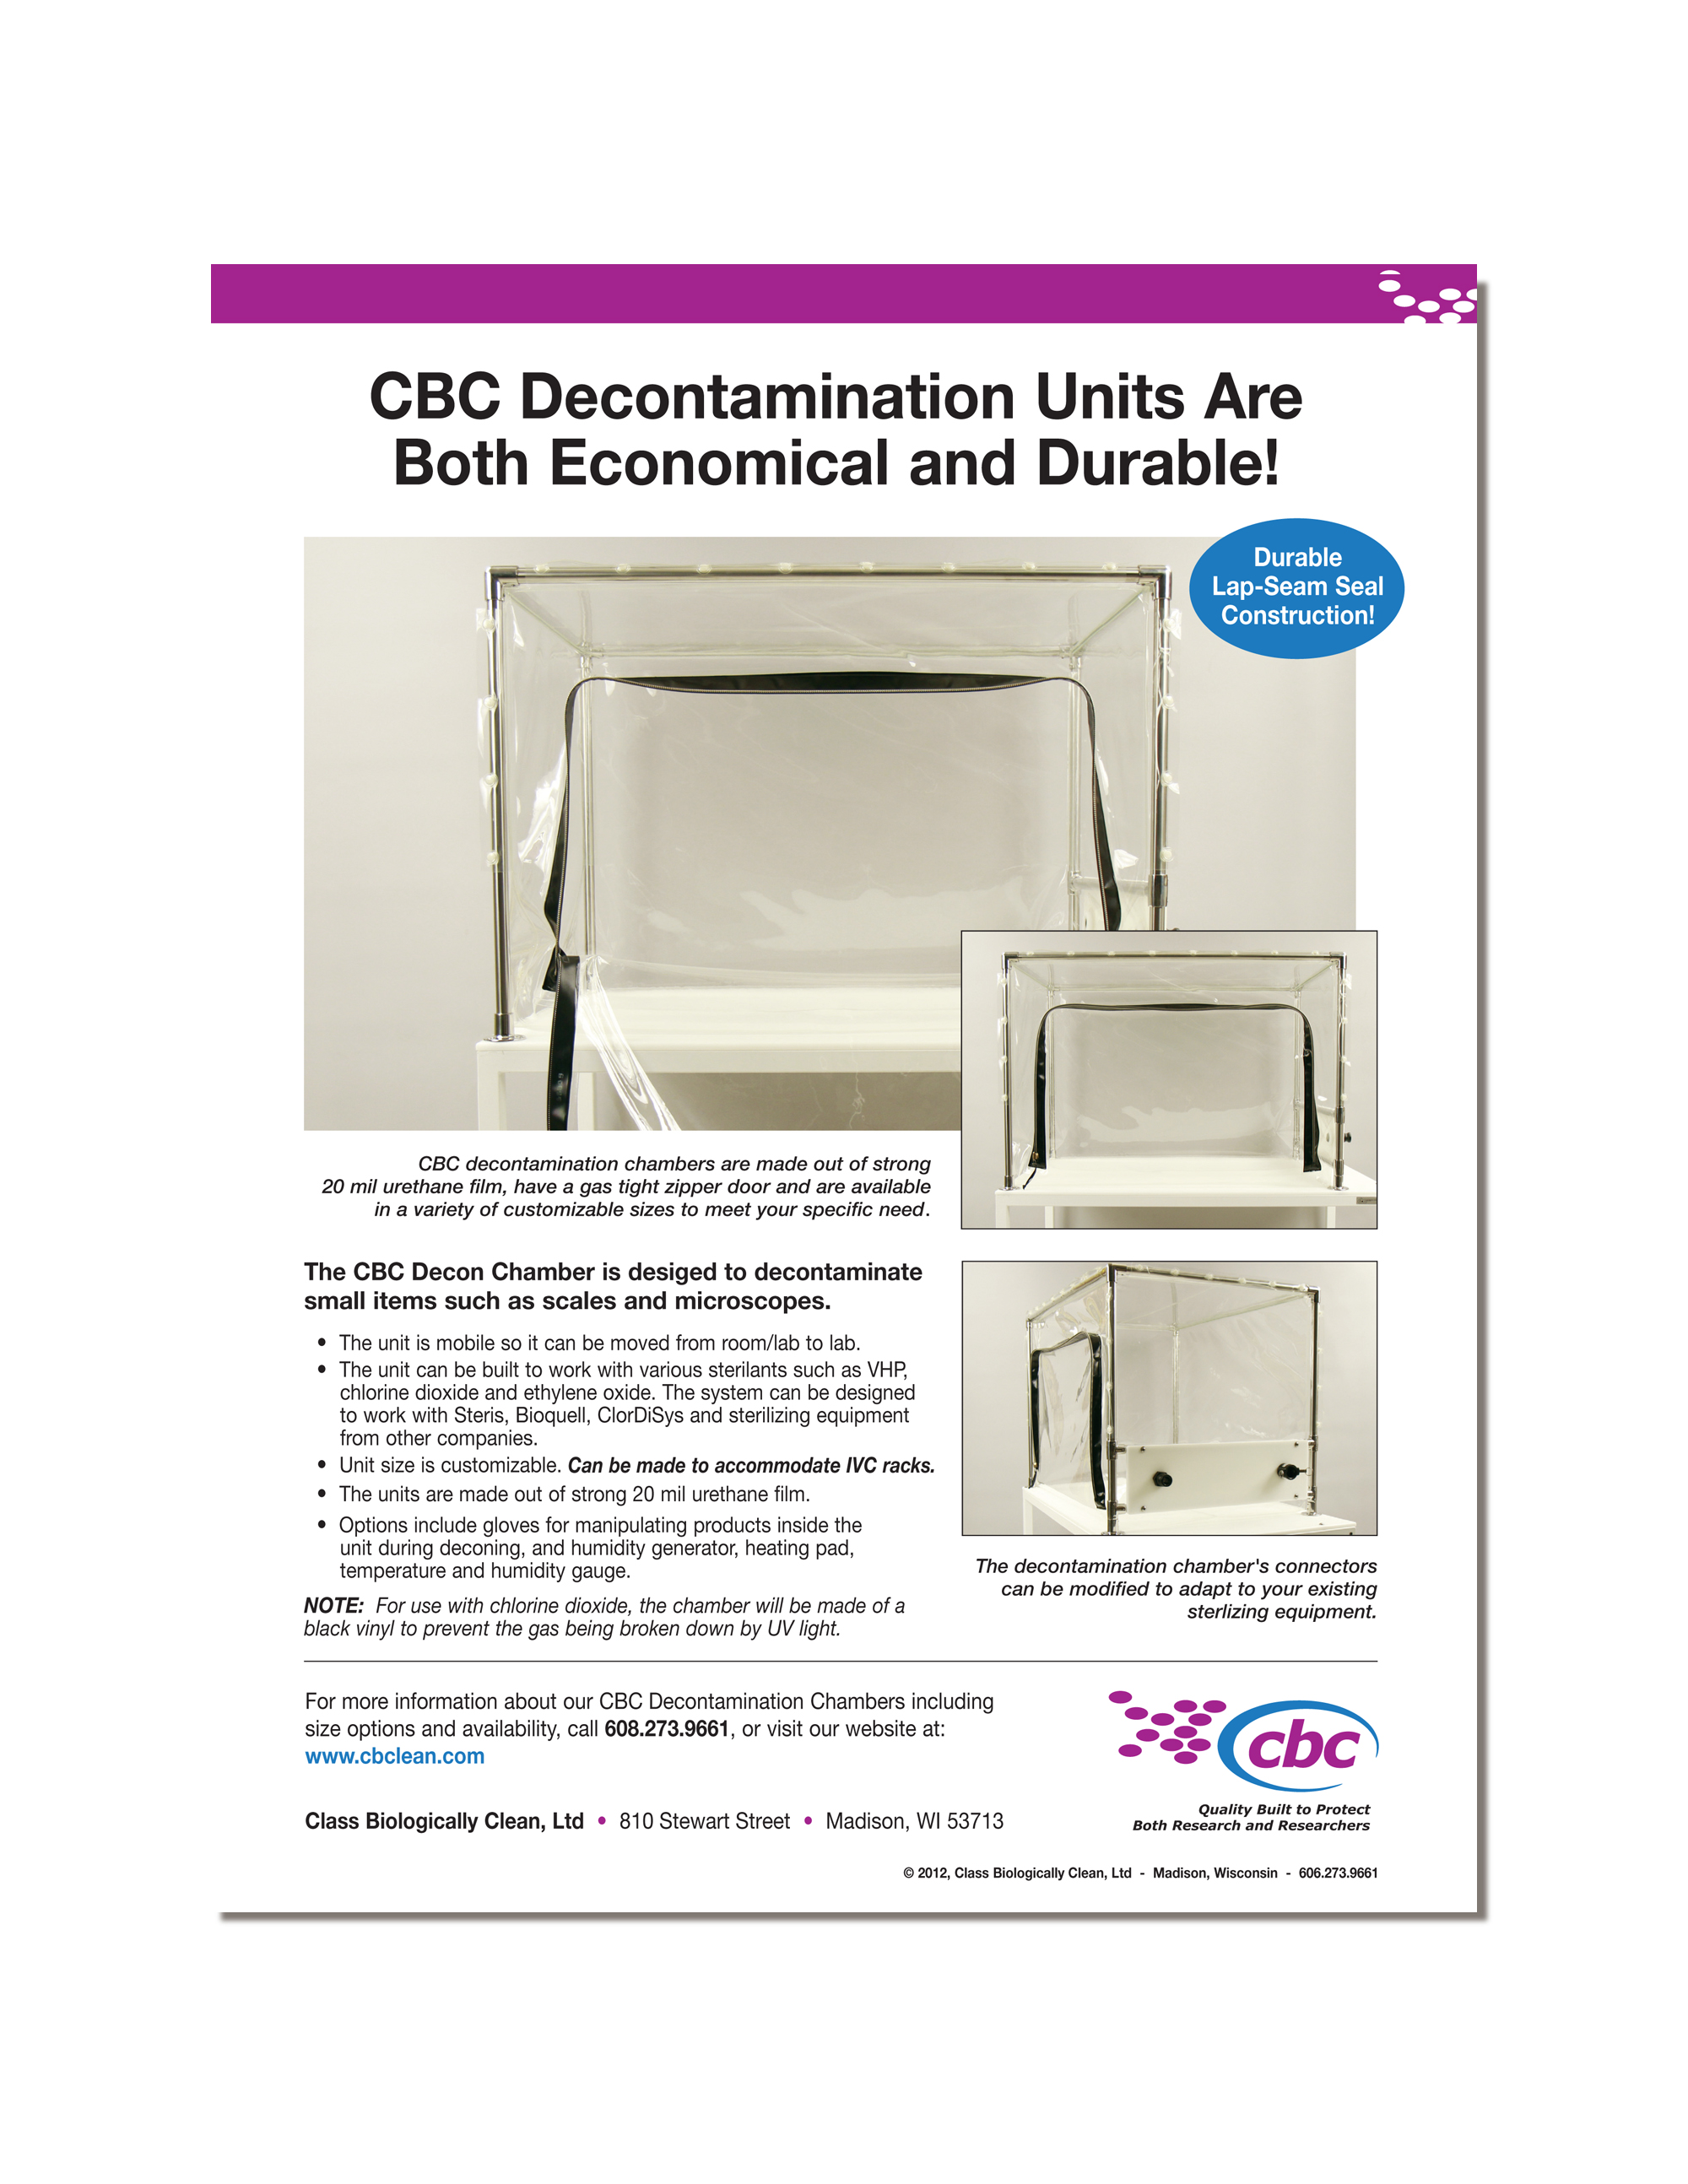 Download a printable flyer about CBC's Decontamination Chamber for decontaminating small equipment such as scales and microscopes. Click here to download flyer.